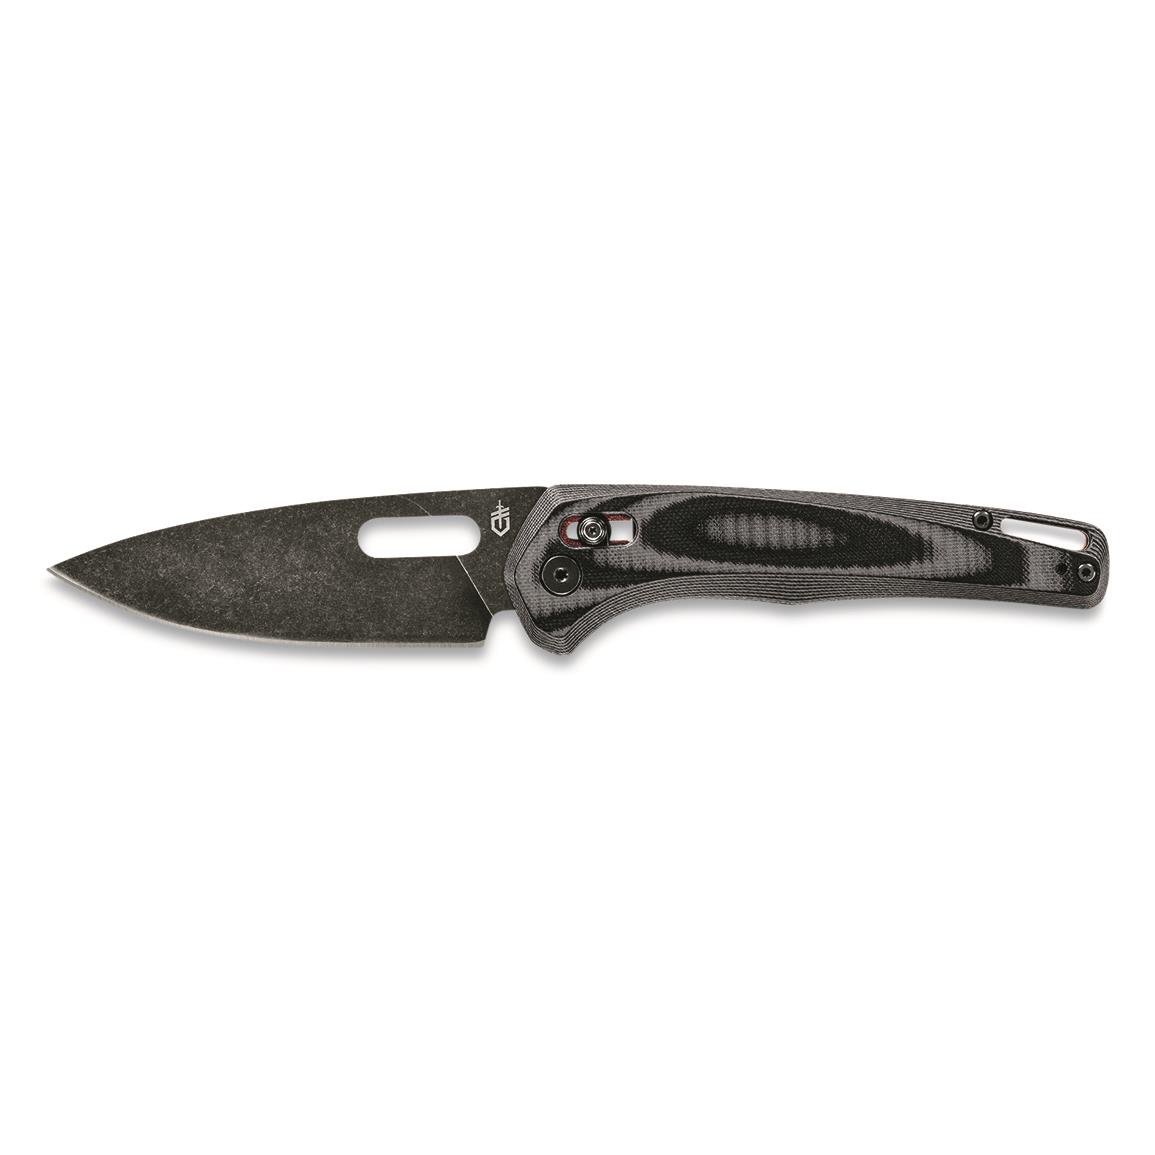 Gerber Sumo Folding Knife, Gray with Red Accents, Red